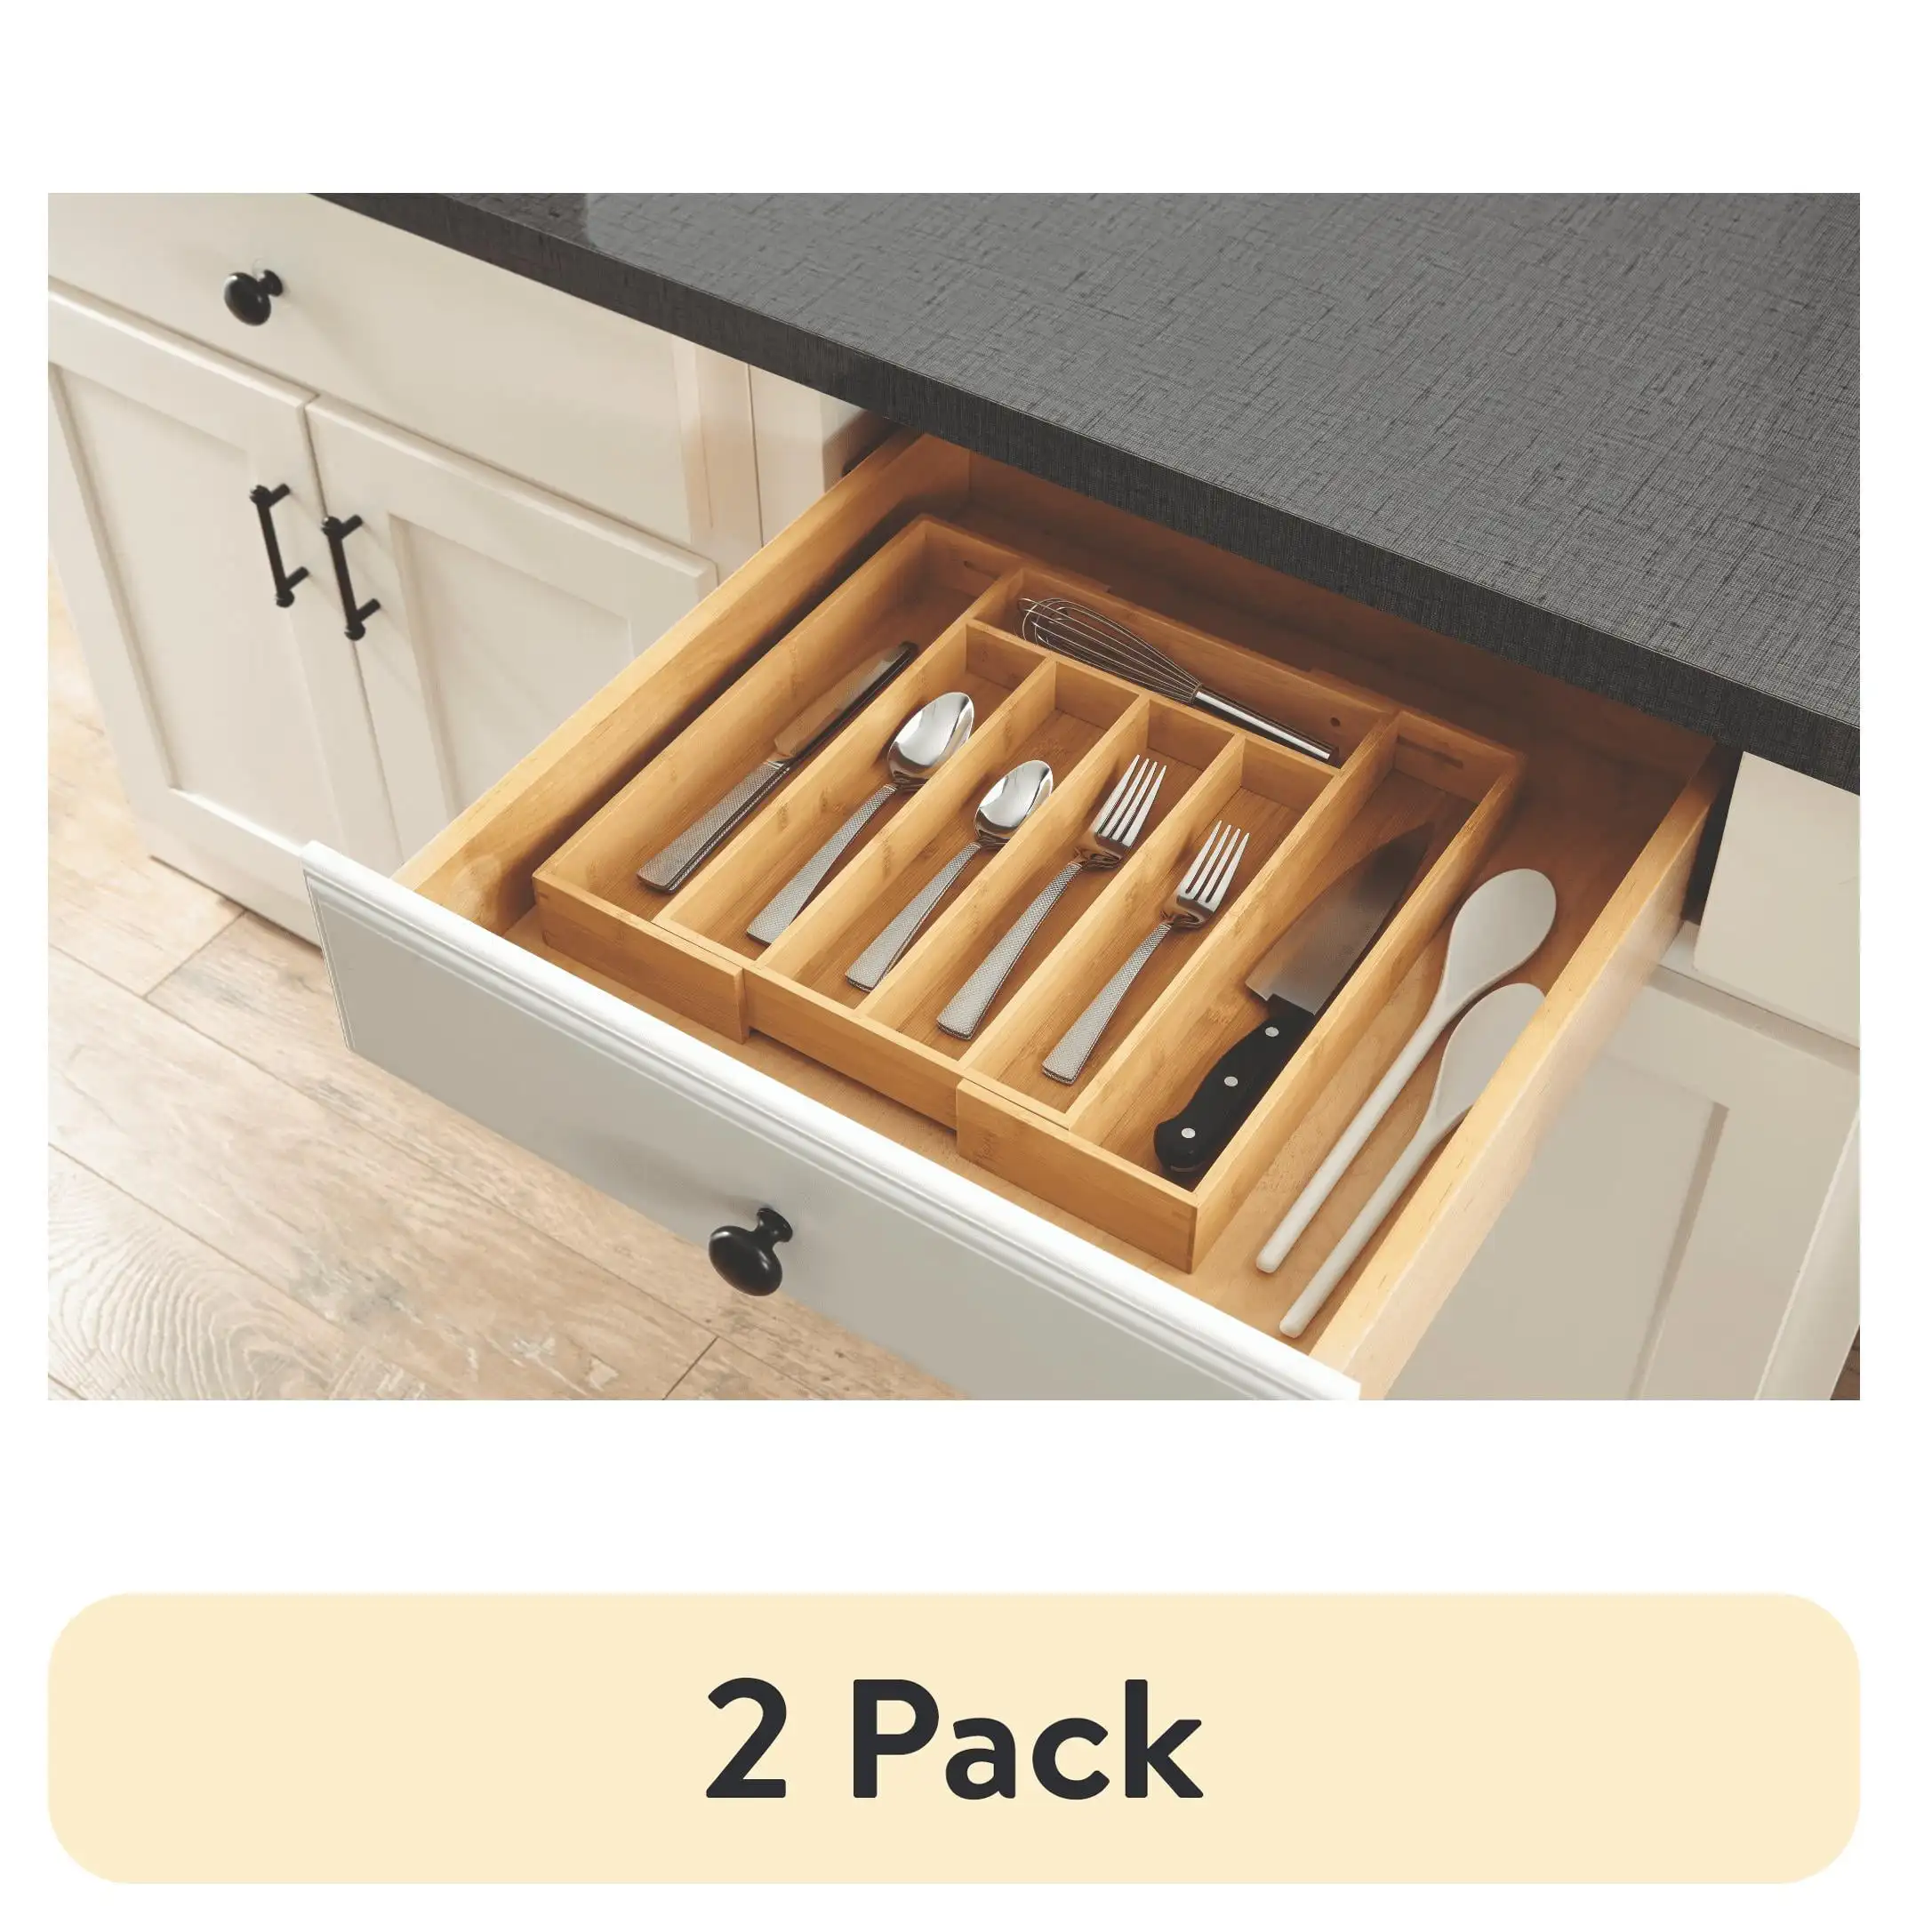 

(2 pack) Better Homes & Gardens Natural Bamboo Expandable Silverware Organizer, 13.98 x 10.04-15.35 x 1.97 inches